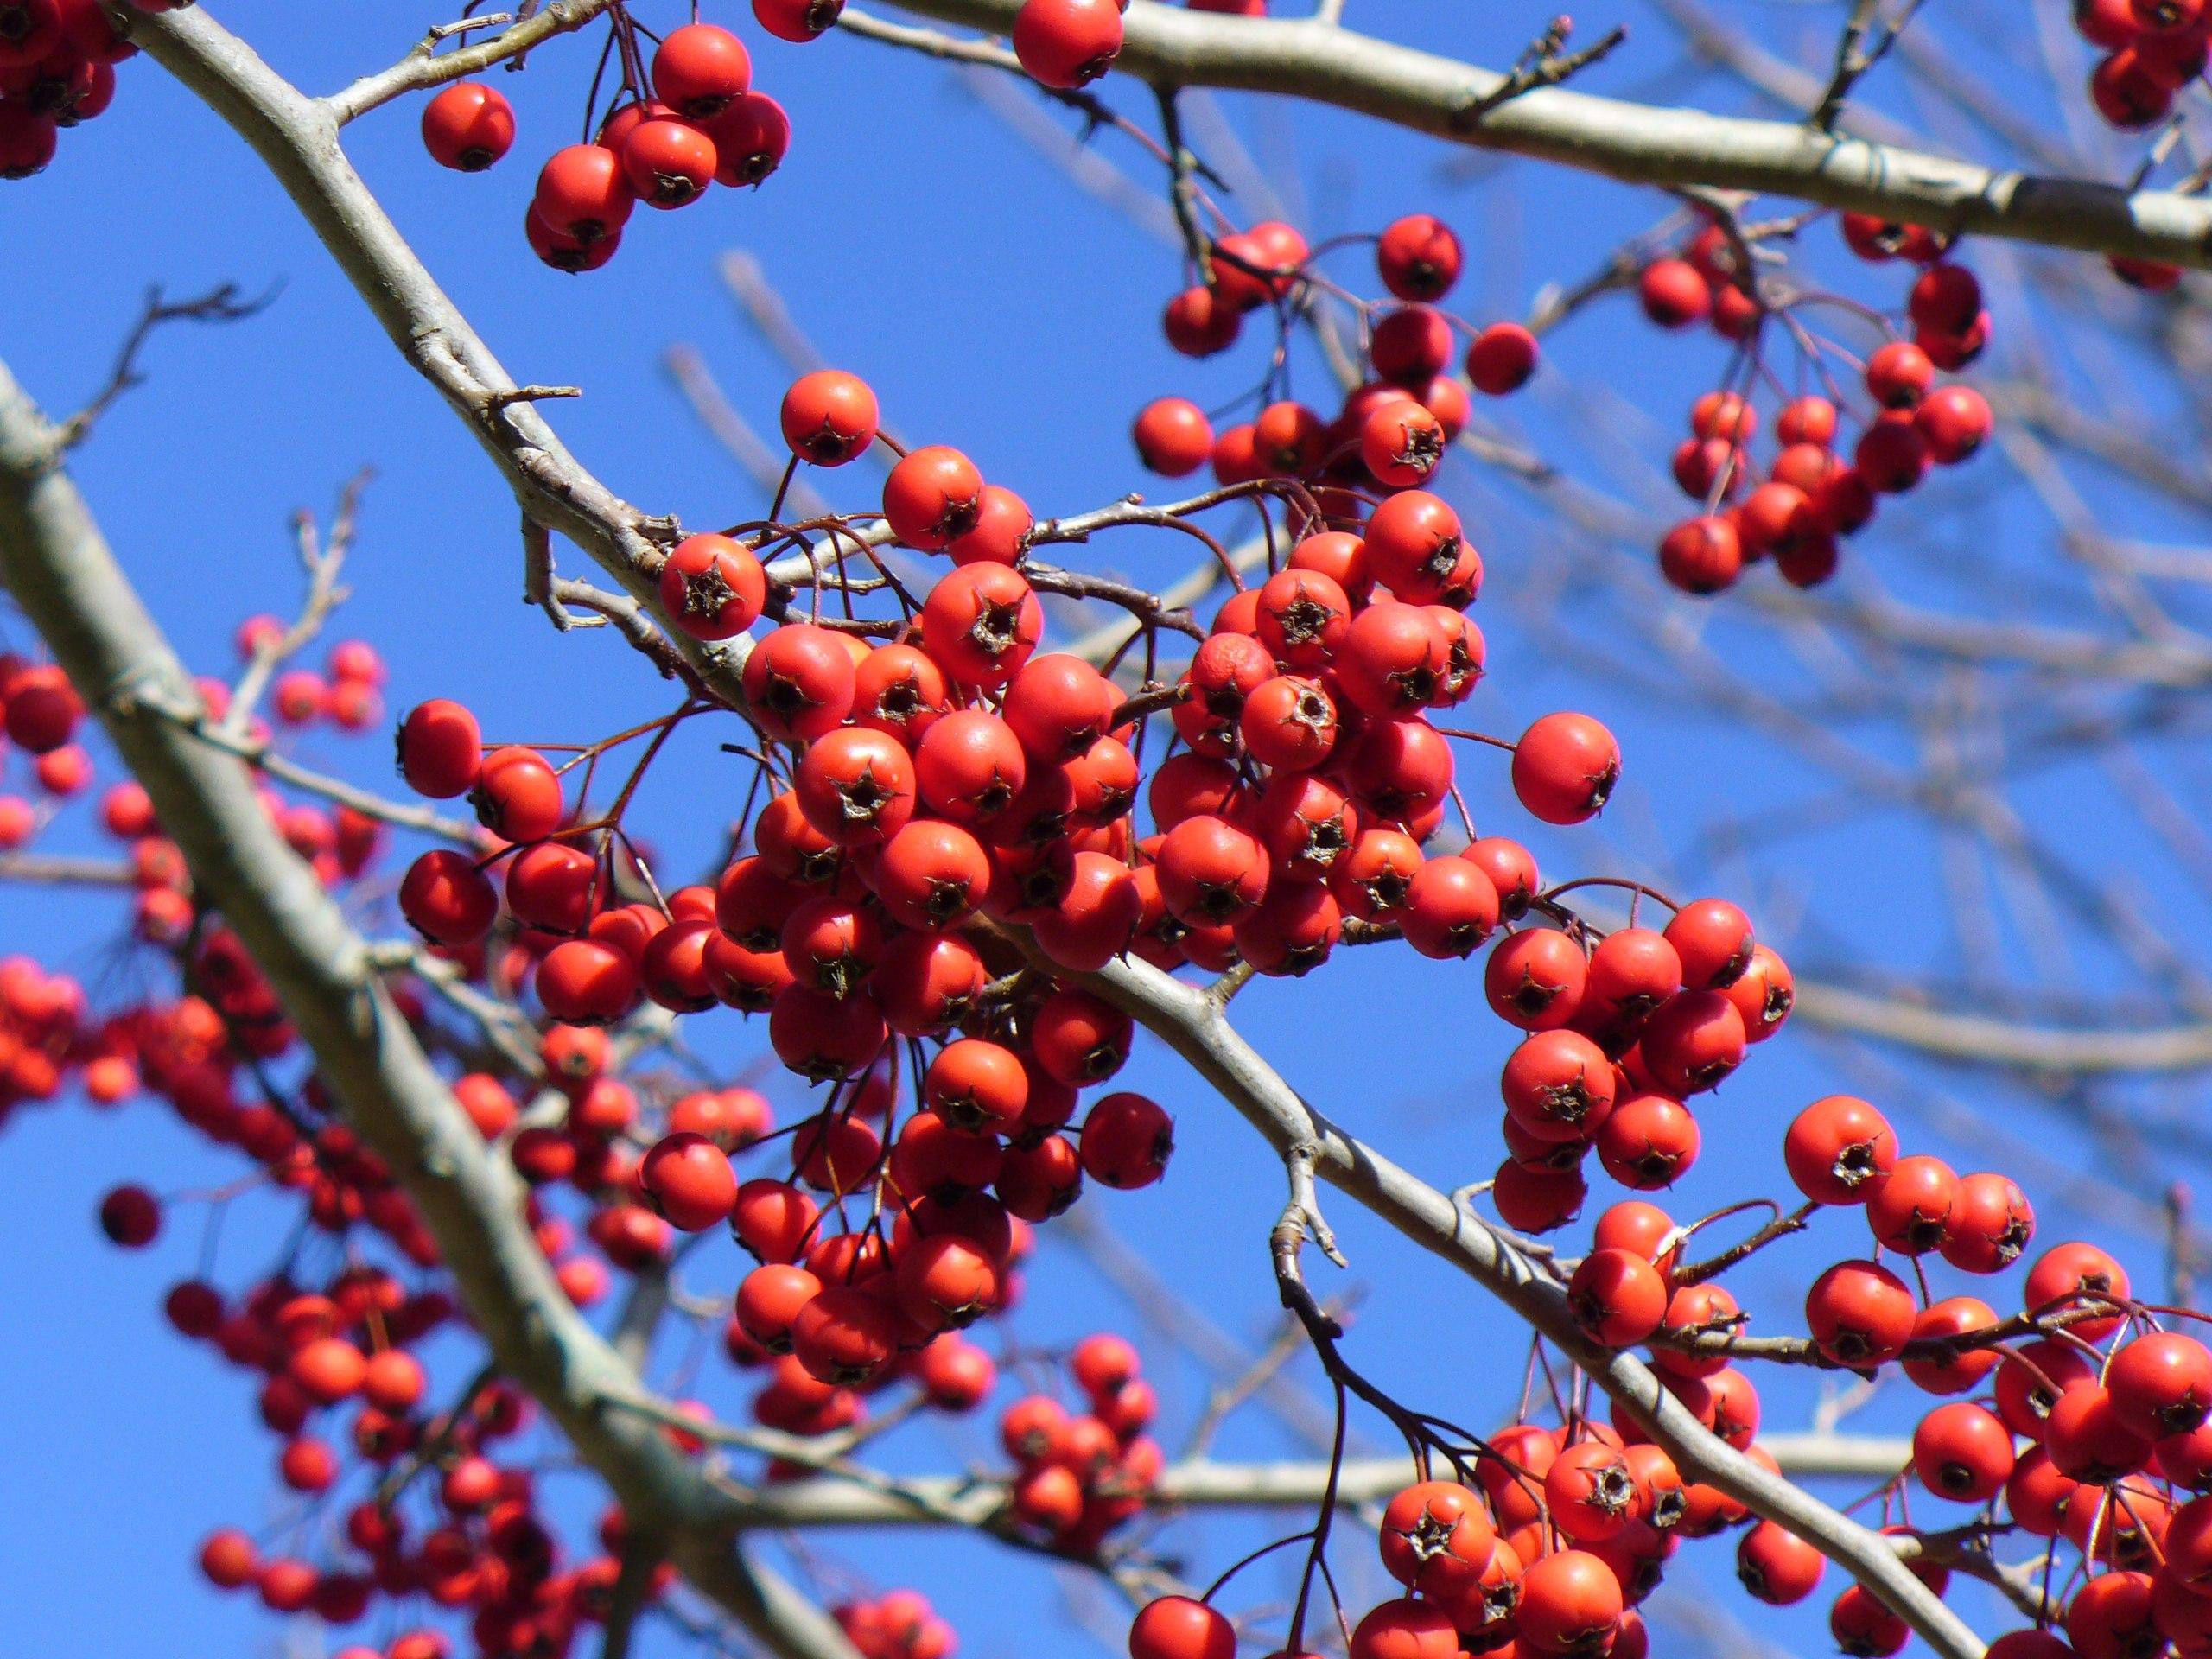 red-black fruits with gray branches